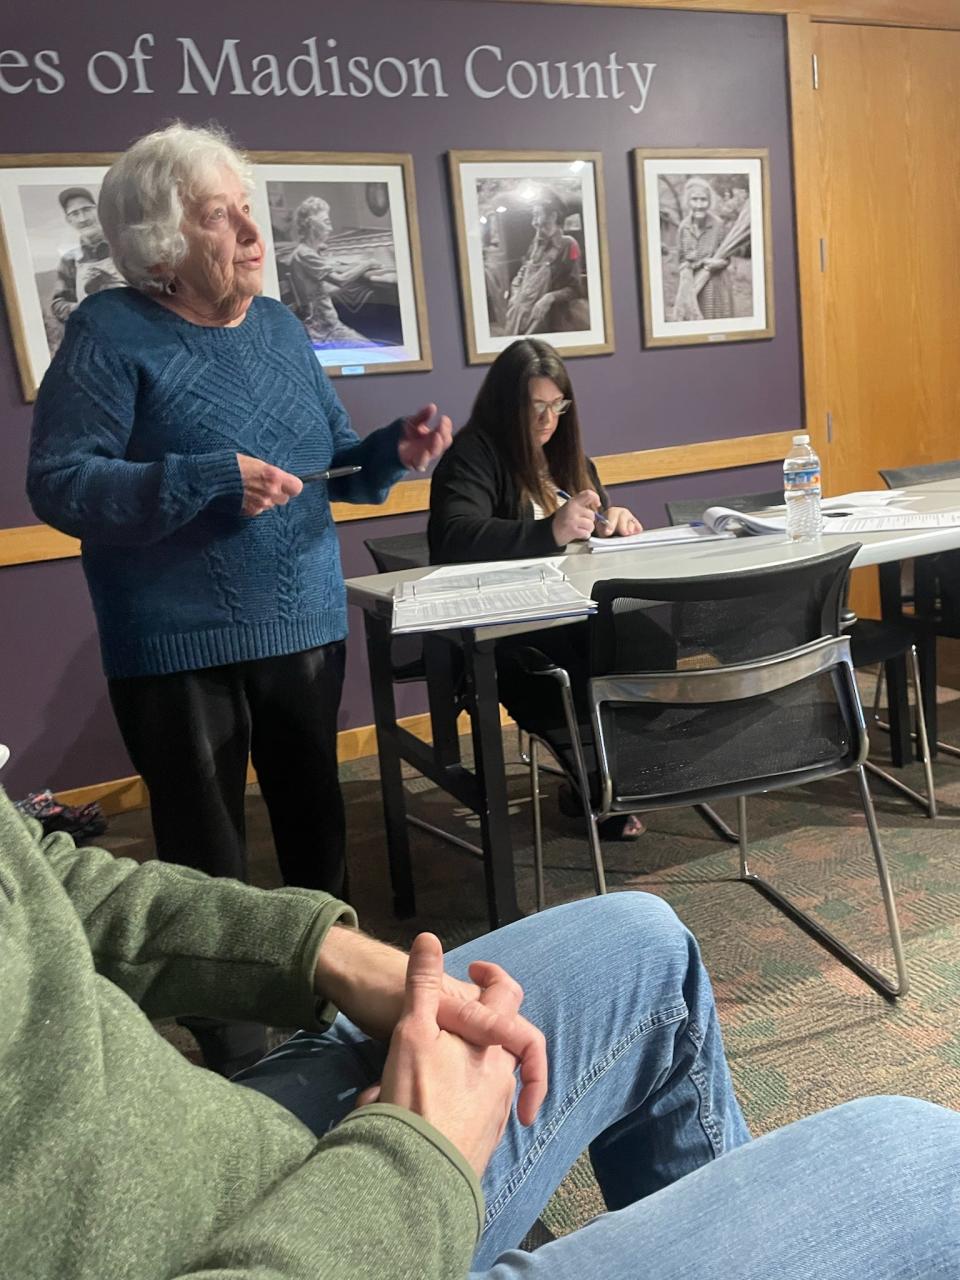 Diane Van Helden is a neighbor of the proposed 14-acre Mars Hill event venue, Blackberry Springs, which will go before the Madison County Board of Adjustment on April 22. Van Helden was granted standing in the board's continued March 25 meeting.